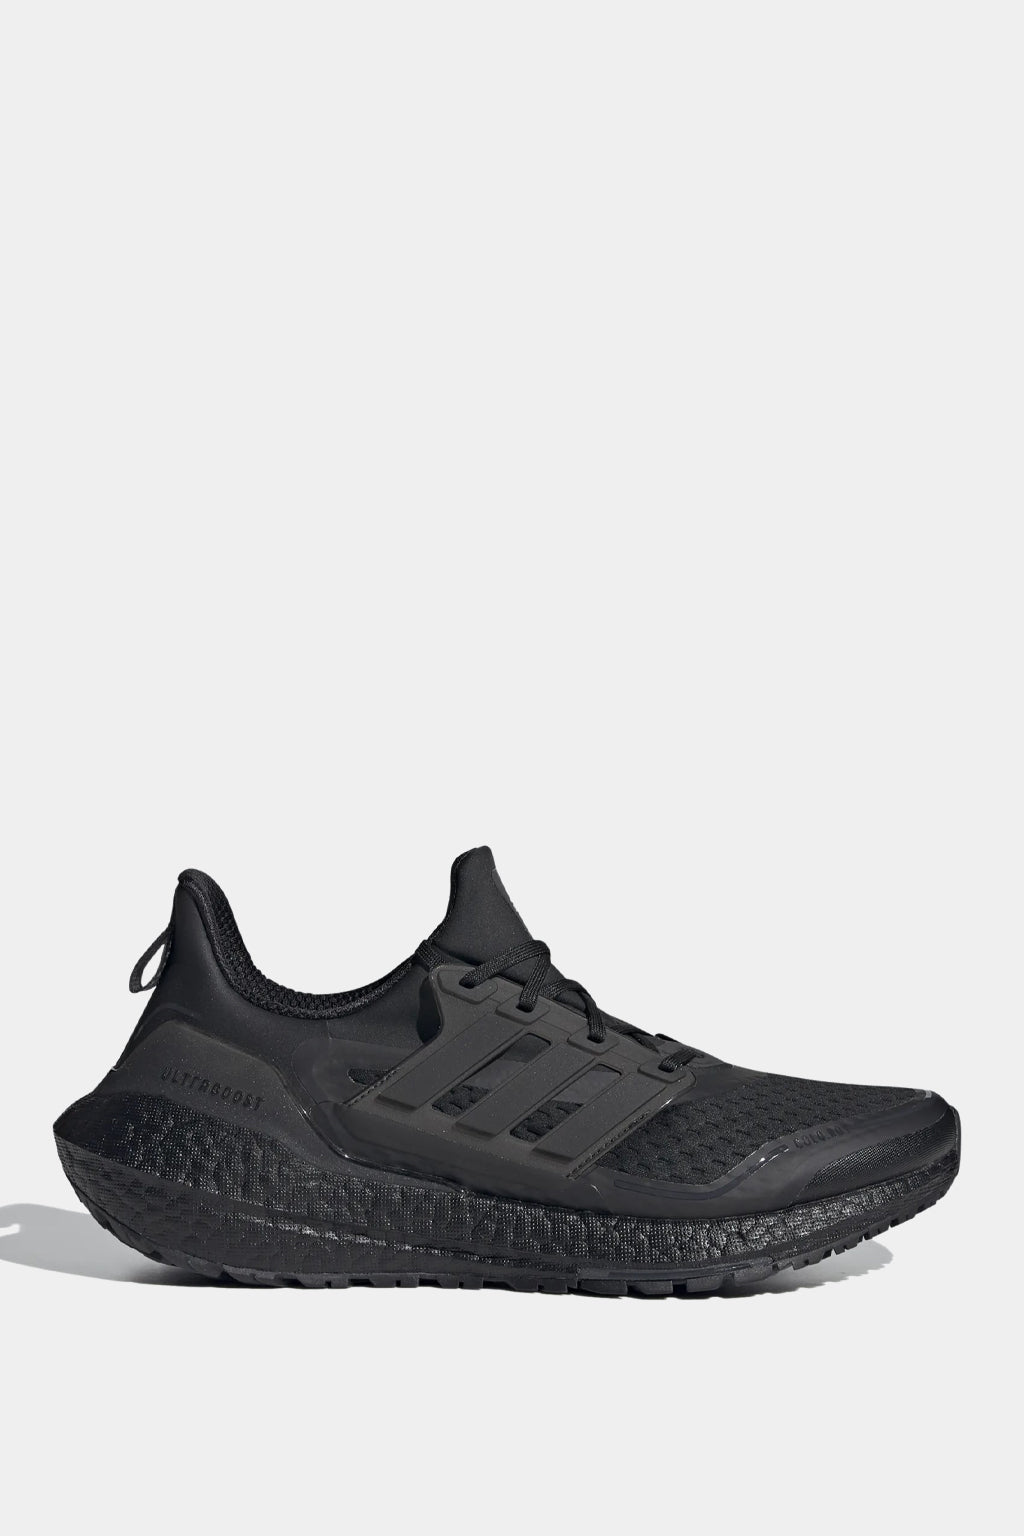 Adidas - Ultraboost 21 Cold.rdy Shoes